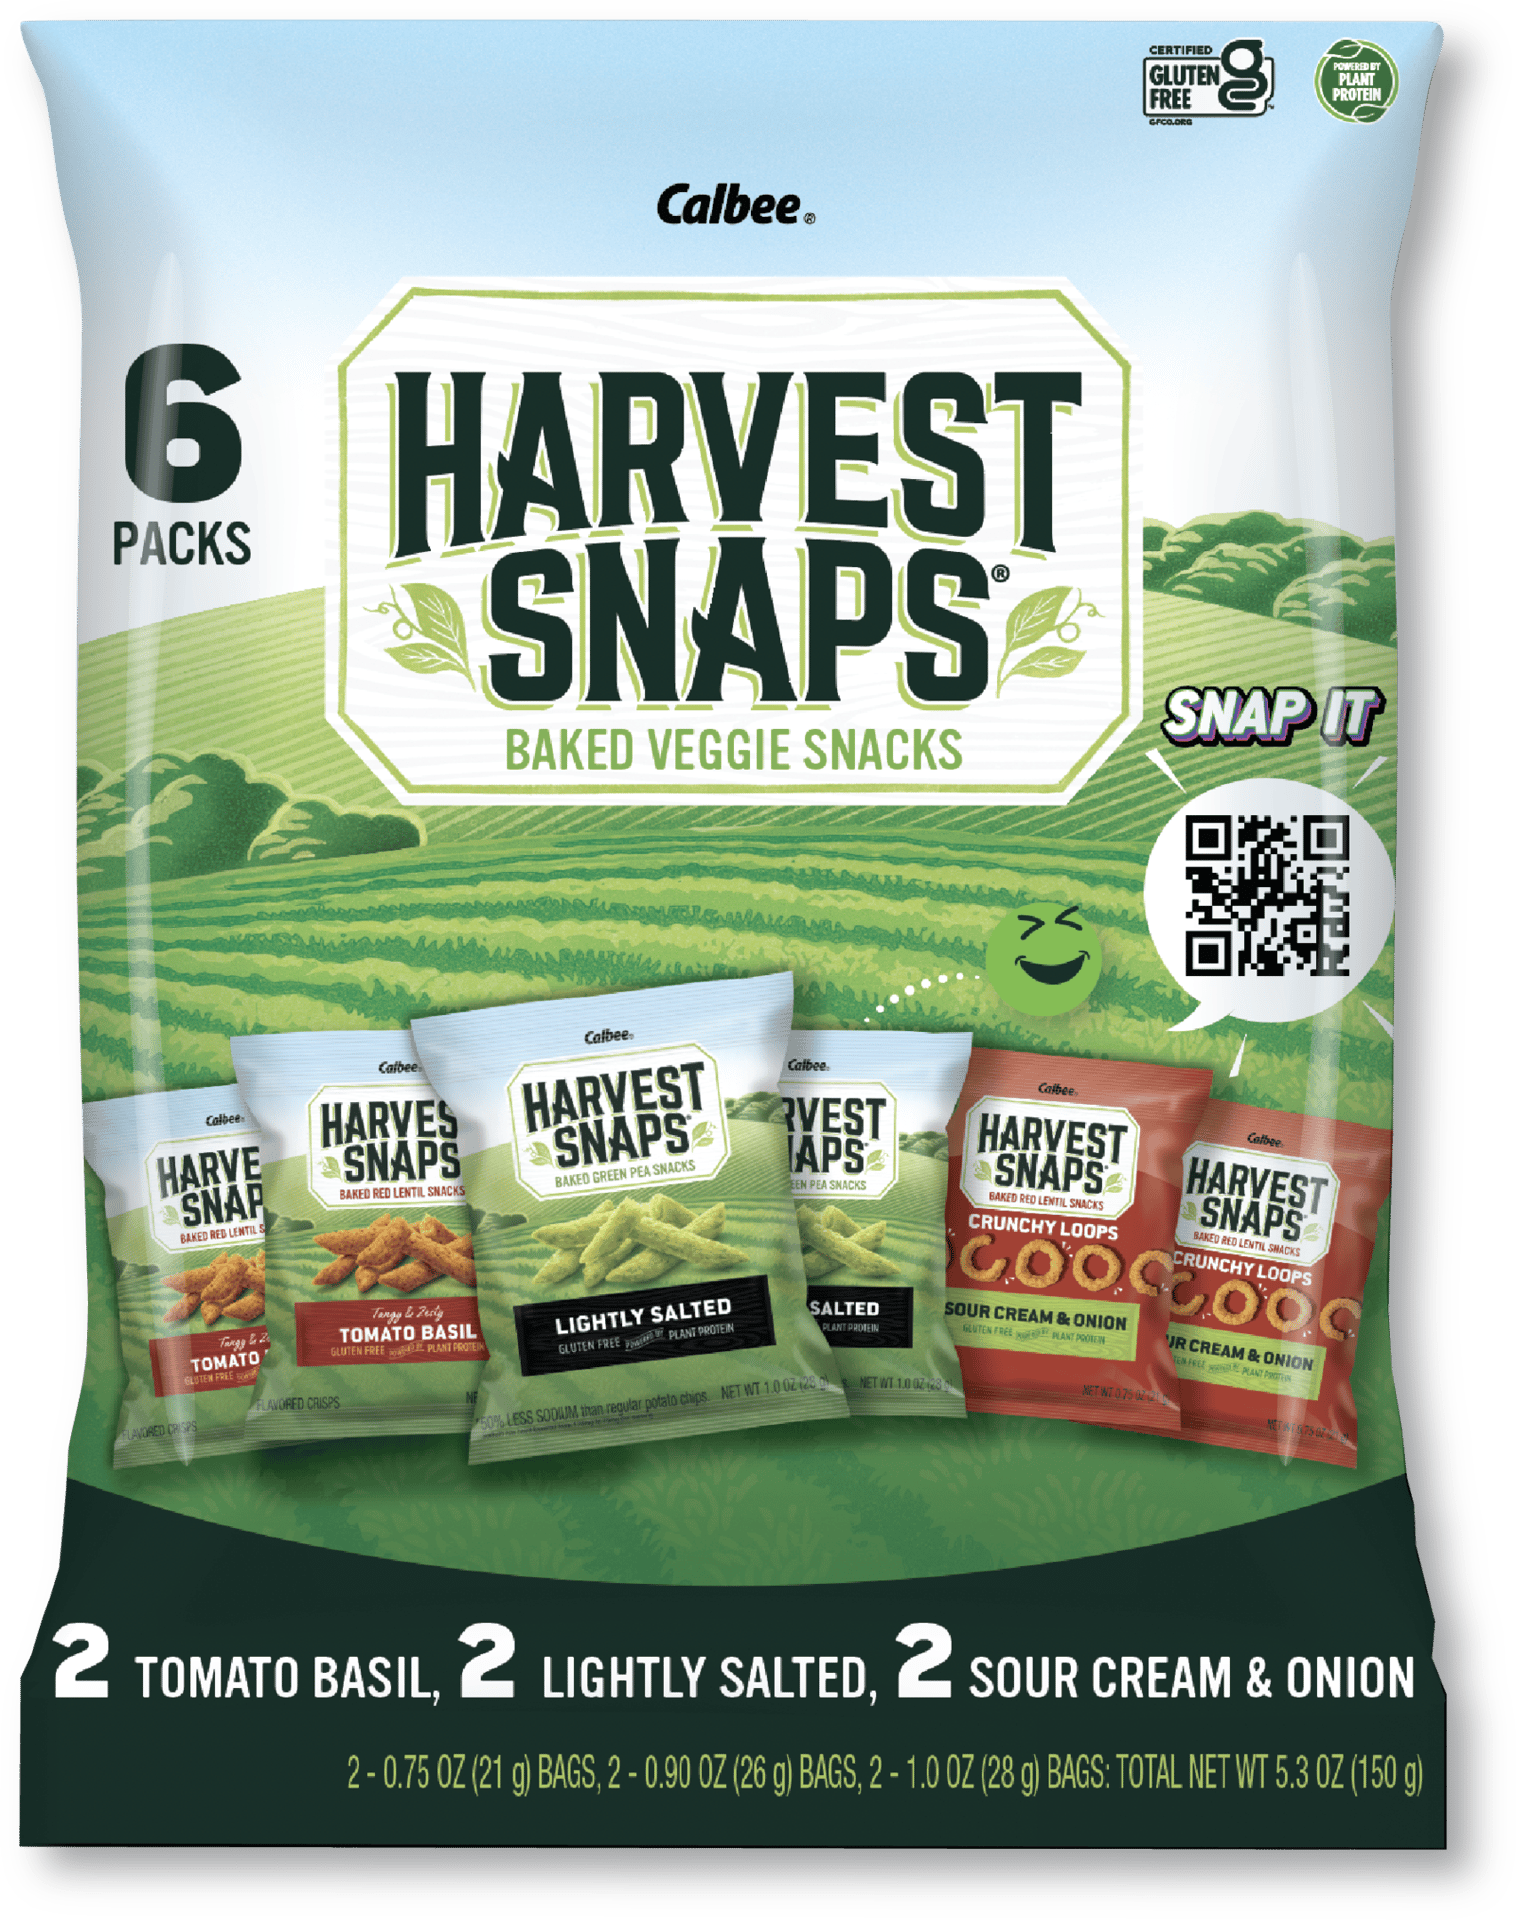 Is it Corn Free Calbee Harvest Snaps Lightly Salted Baked Green Pea Snacks